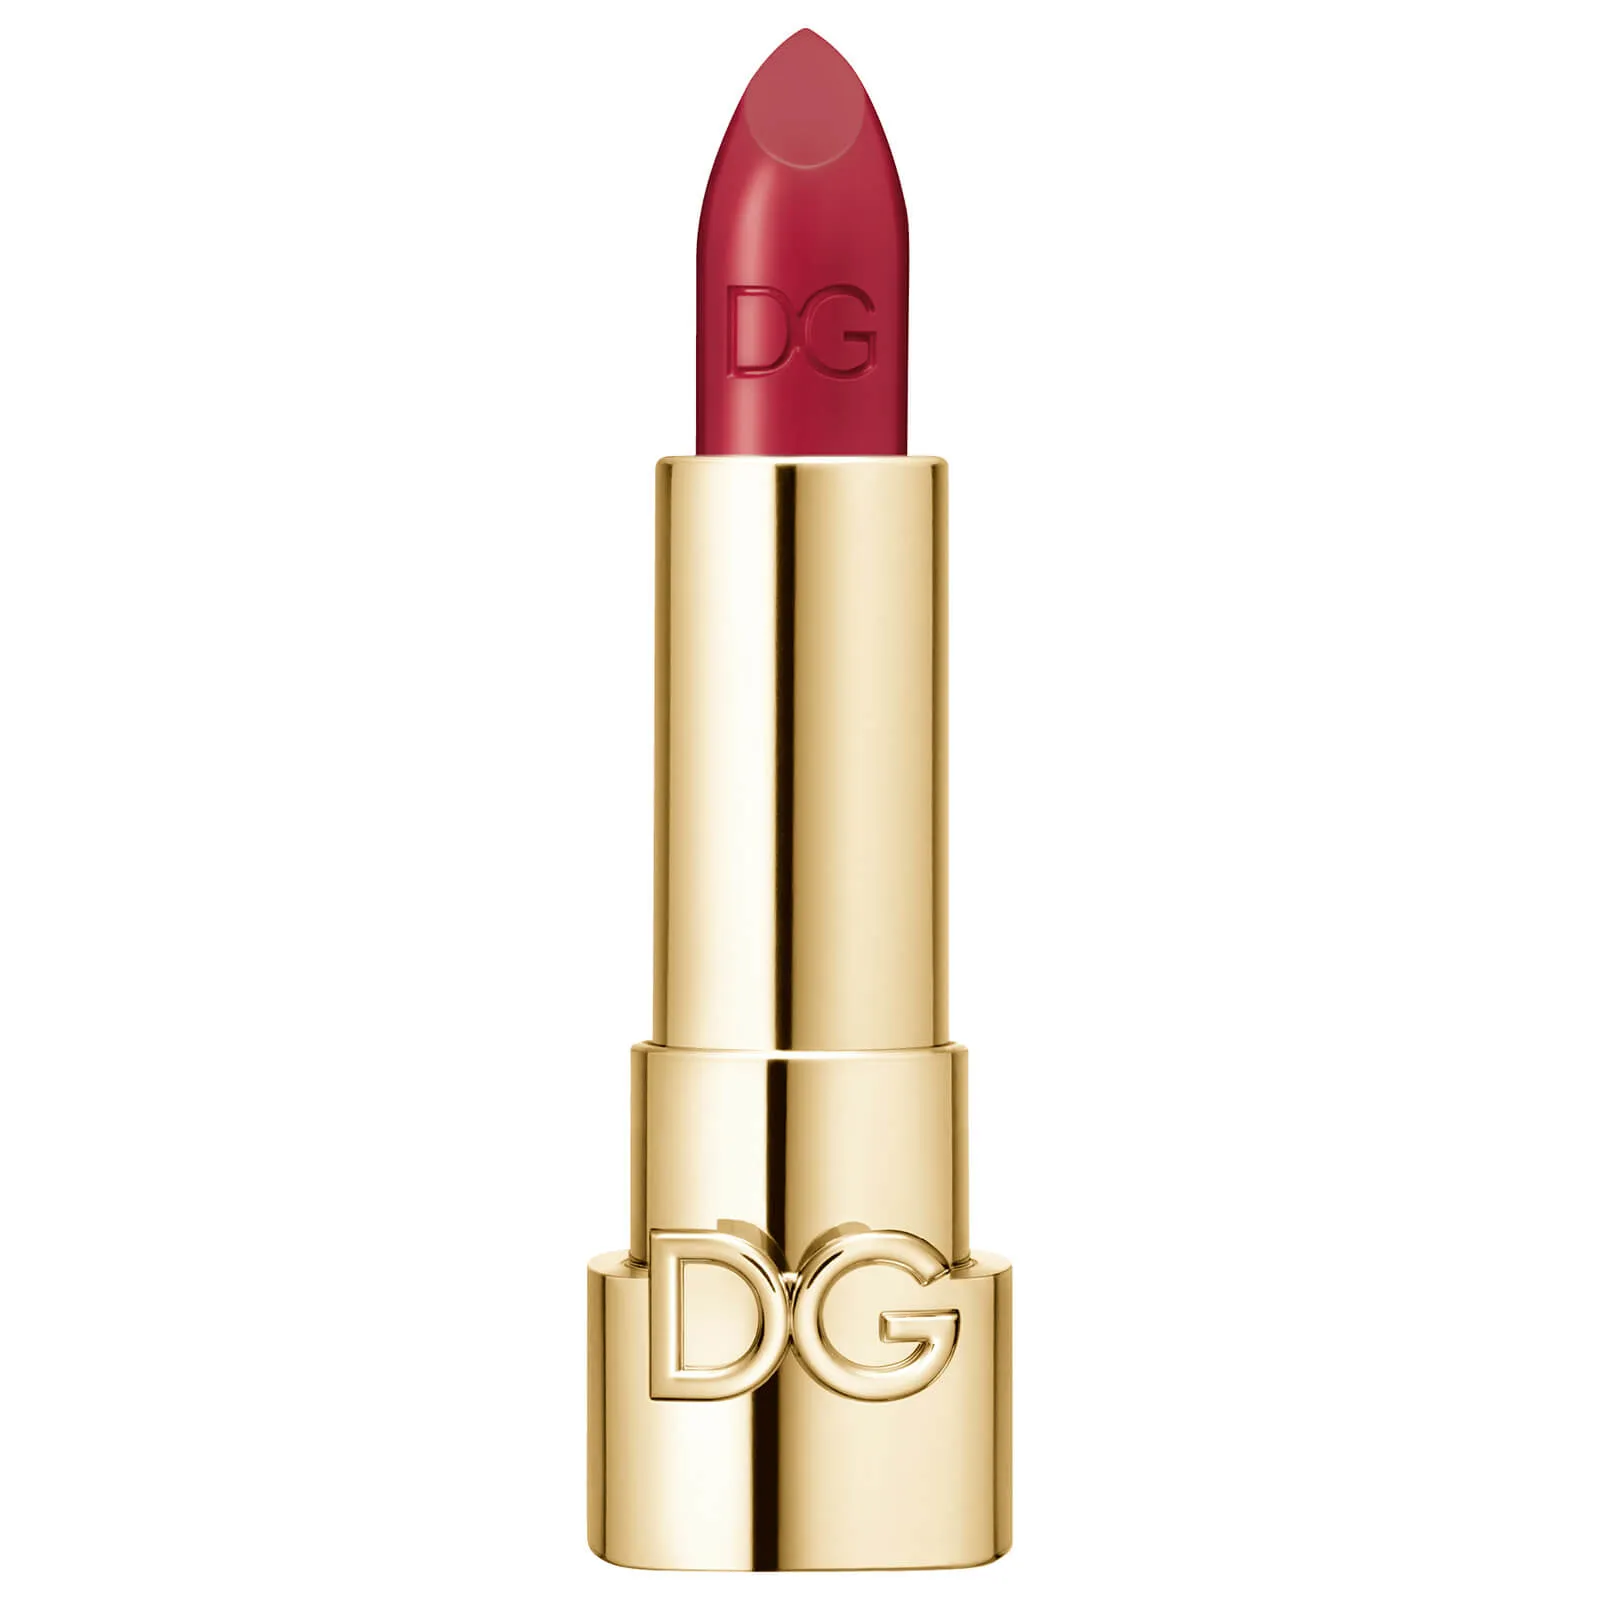  The Only One Lipstick 1.7g (No Cap) (Various Shades) - 640 #DGAmore